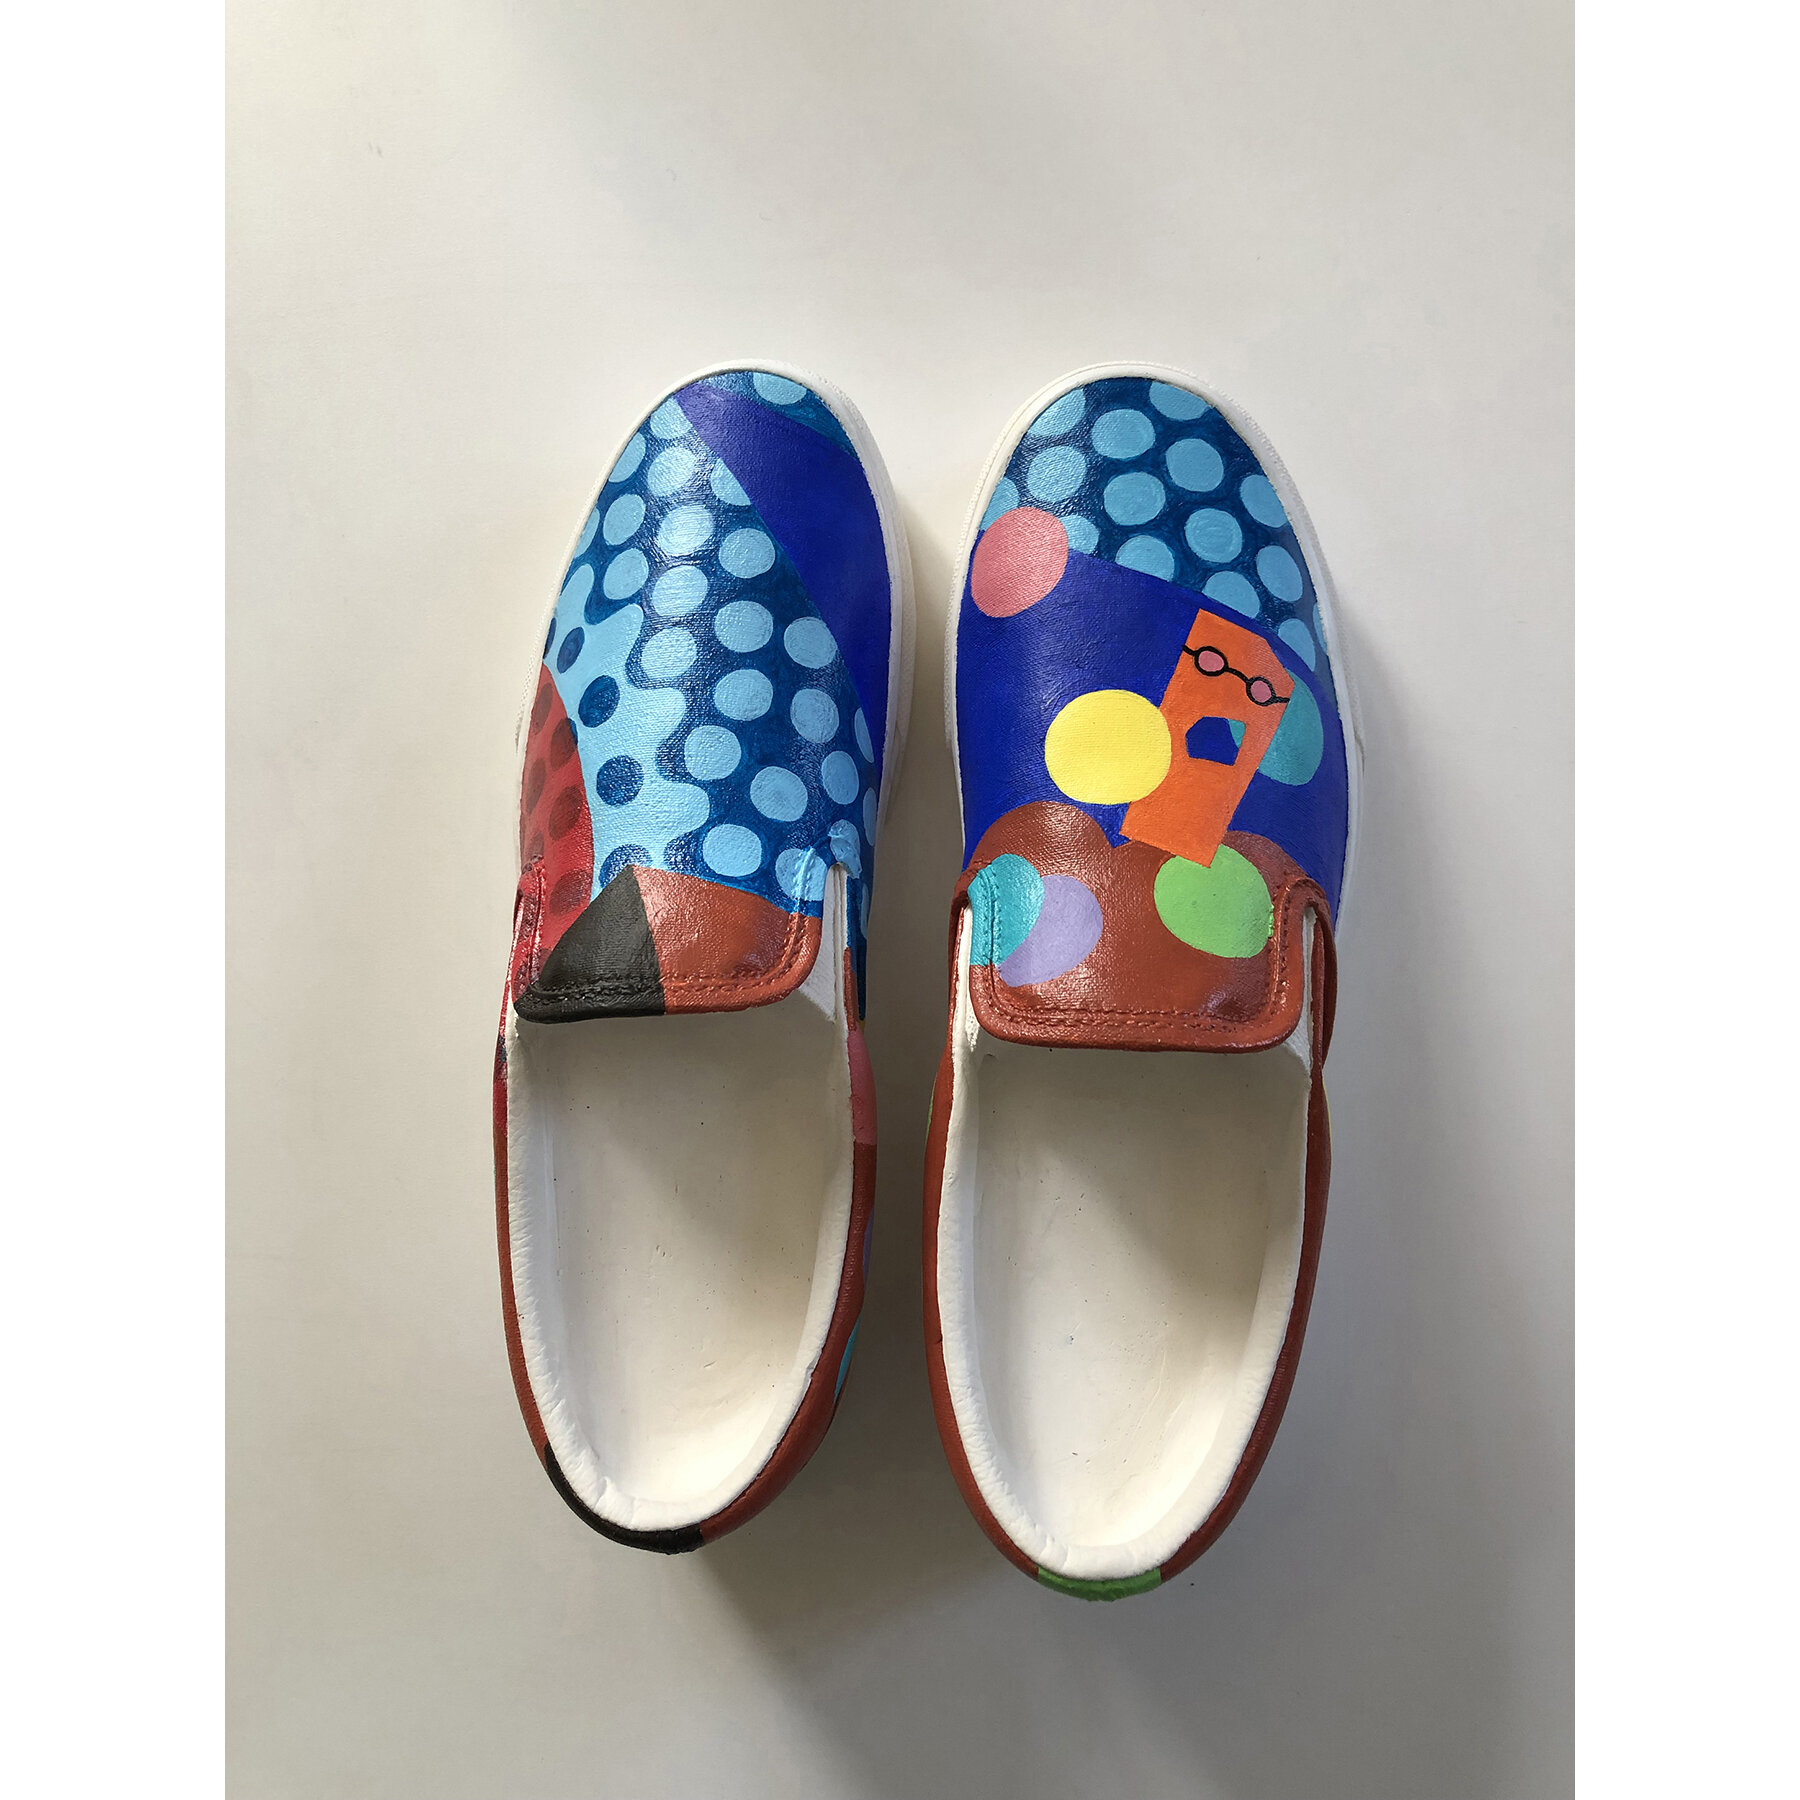    Beautifully Bold painted slip-on    in collaboration with paintedbyjdg  acrylic on canvas shoes; variable sizes 